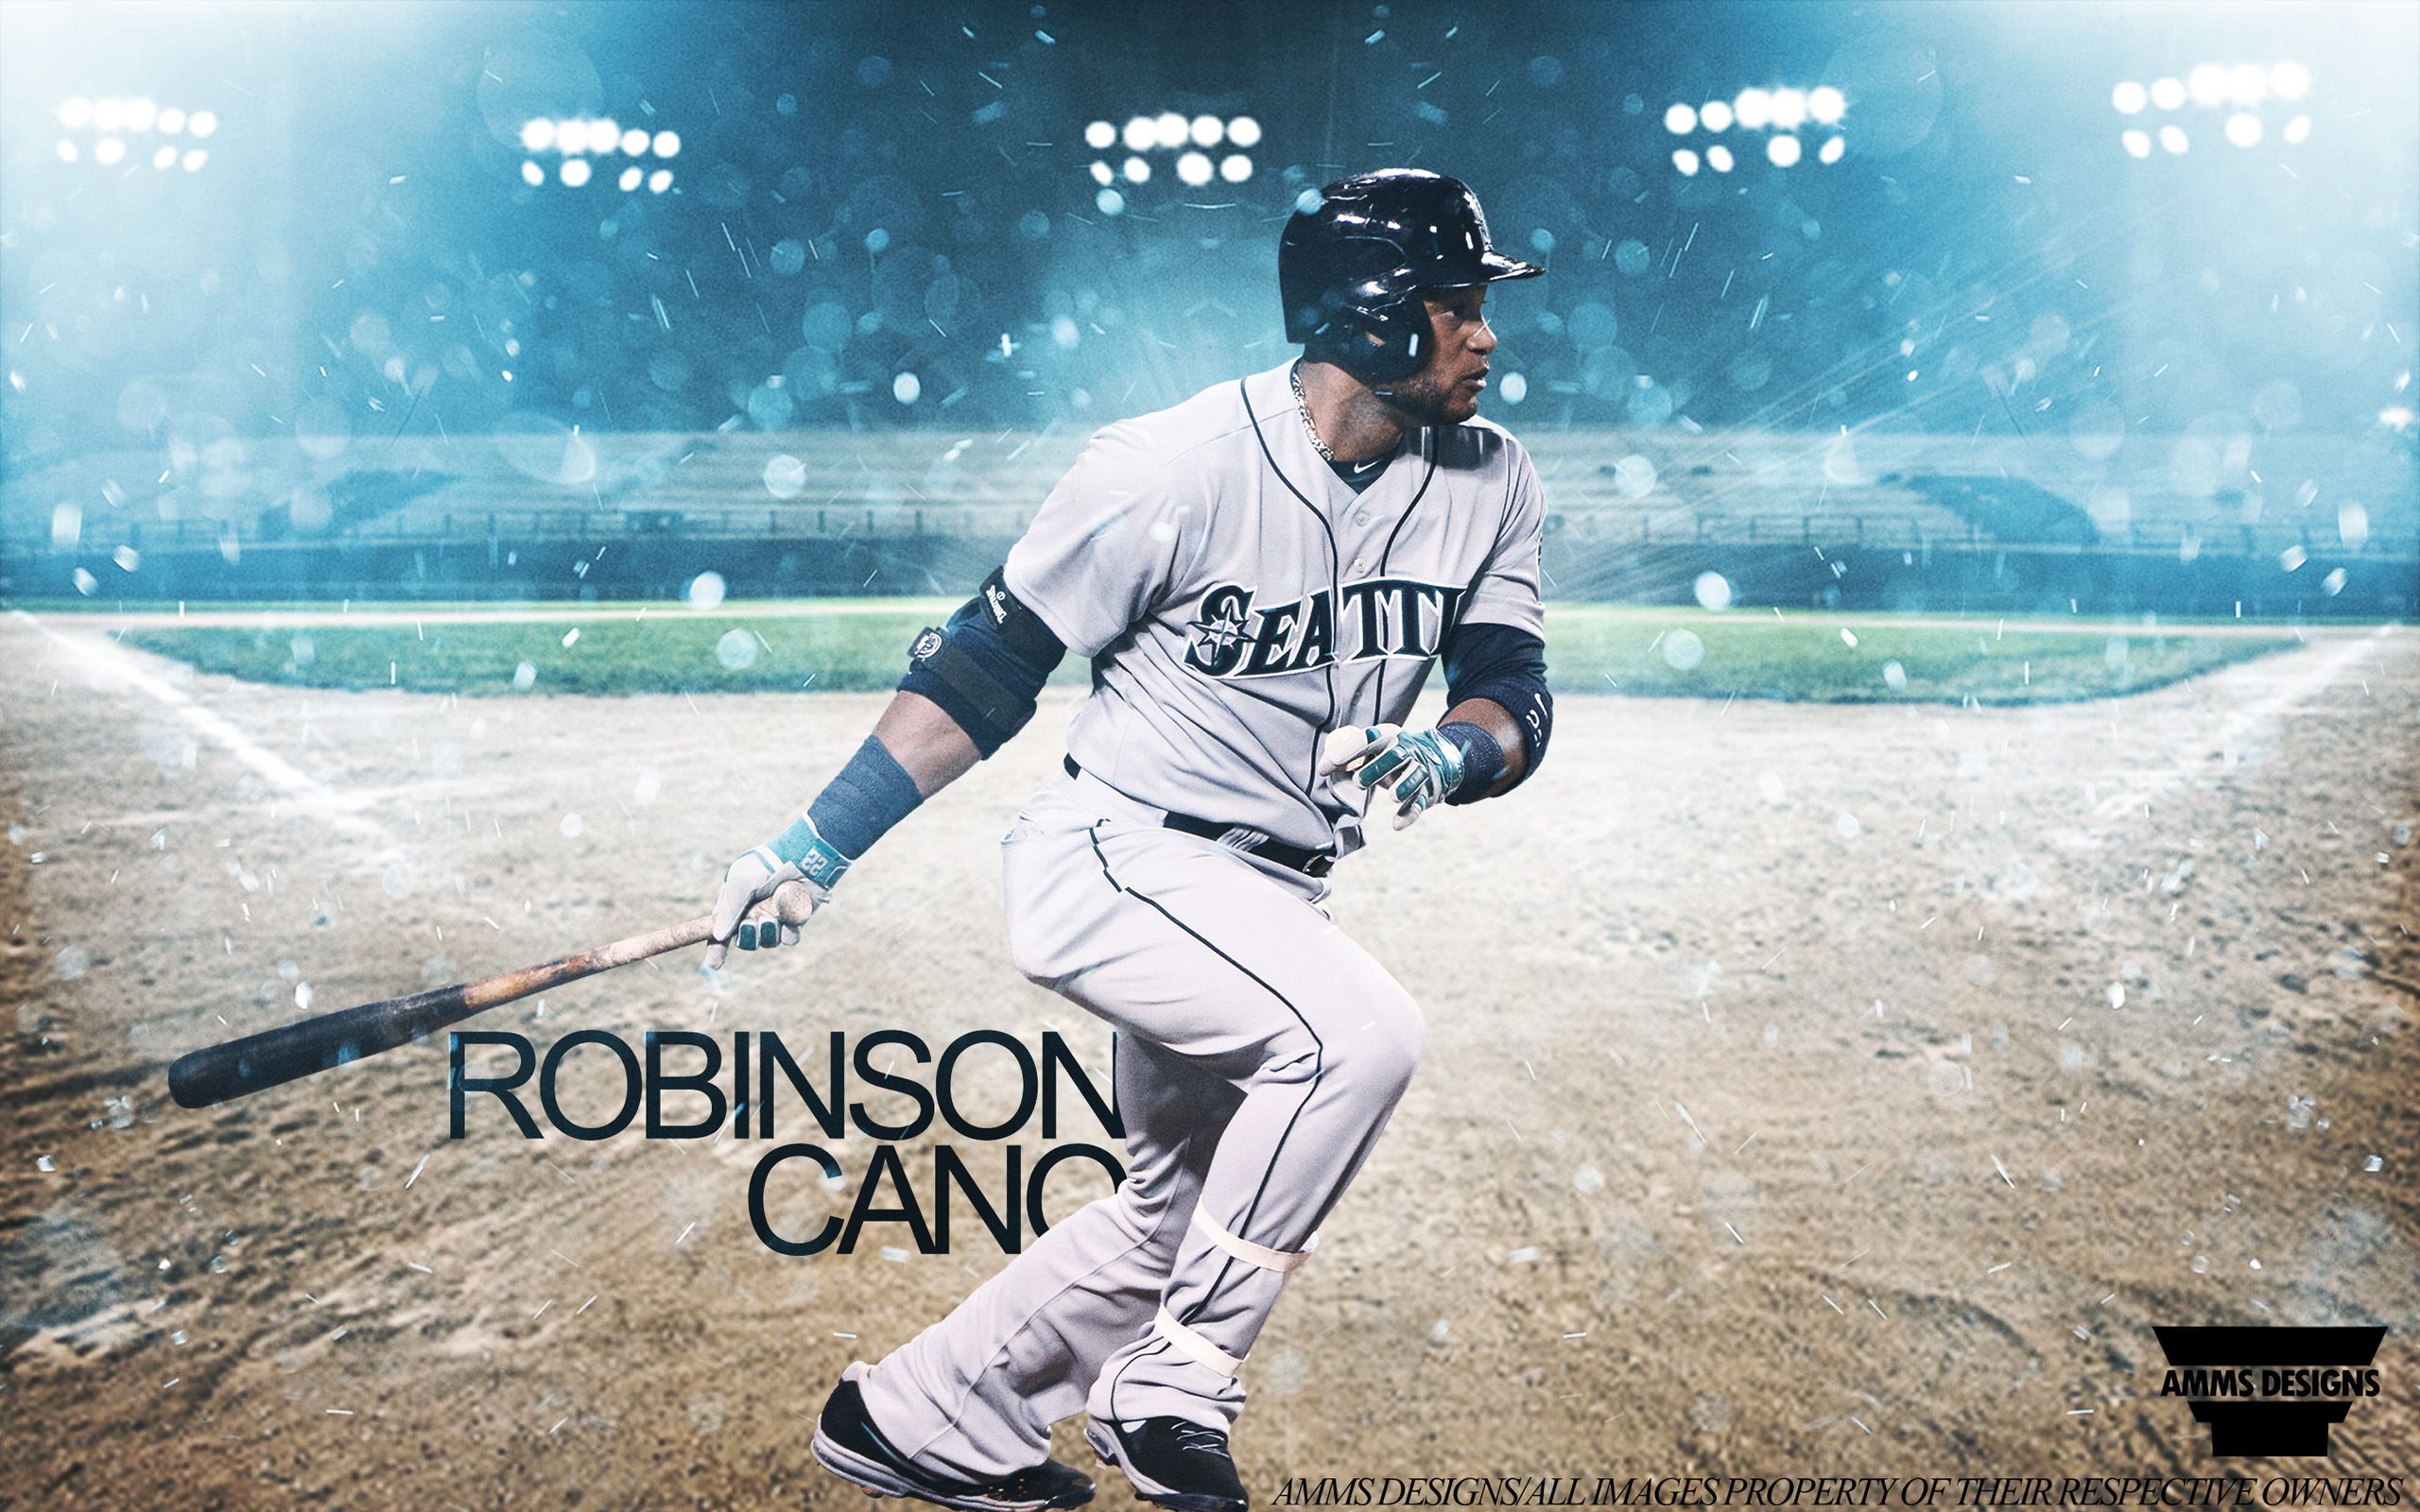 Image Result For Robinson Cano Mariners Wallpaper Best Active